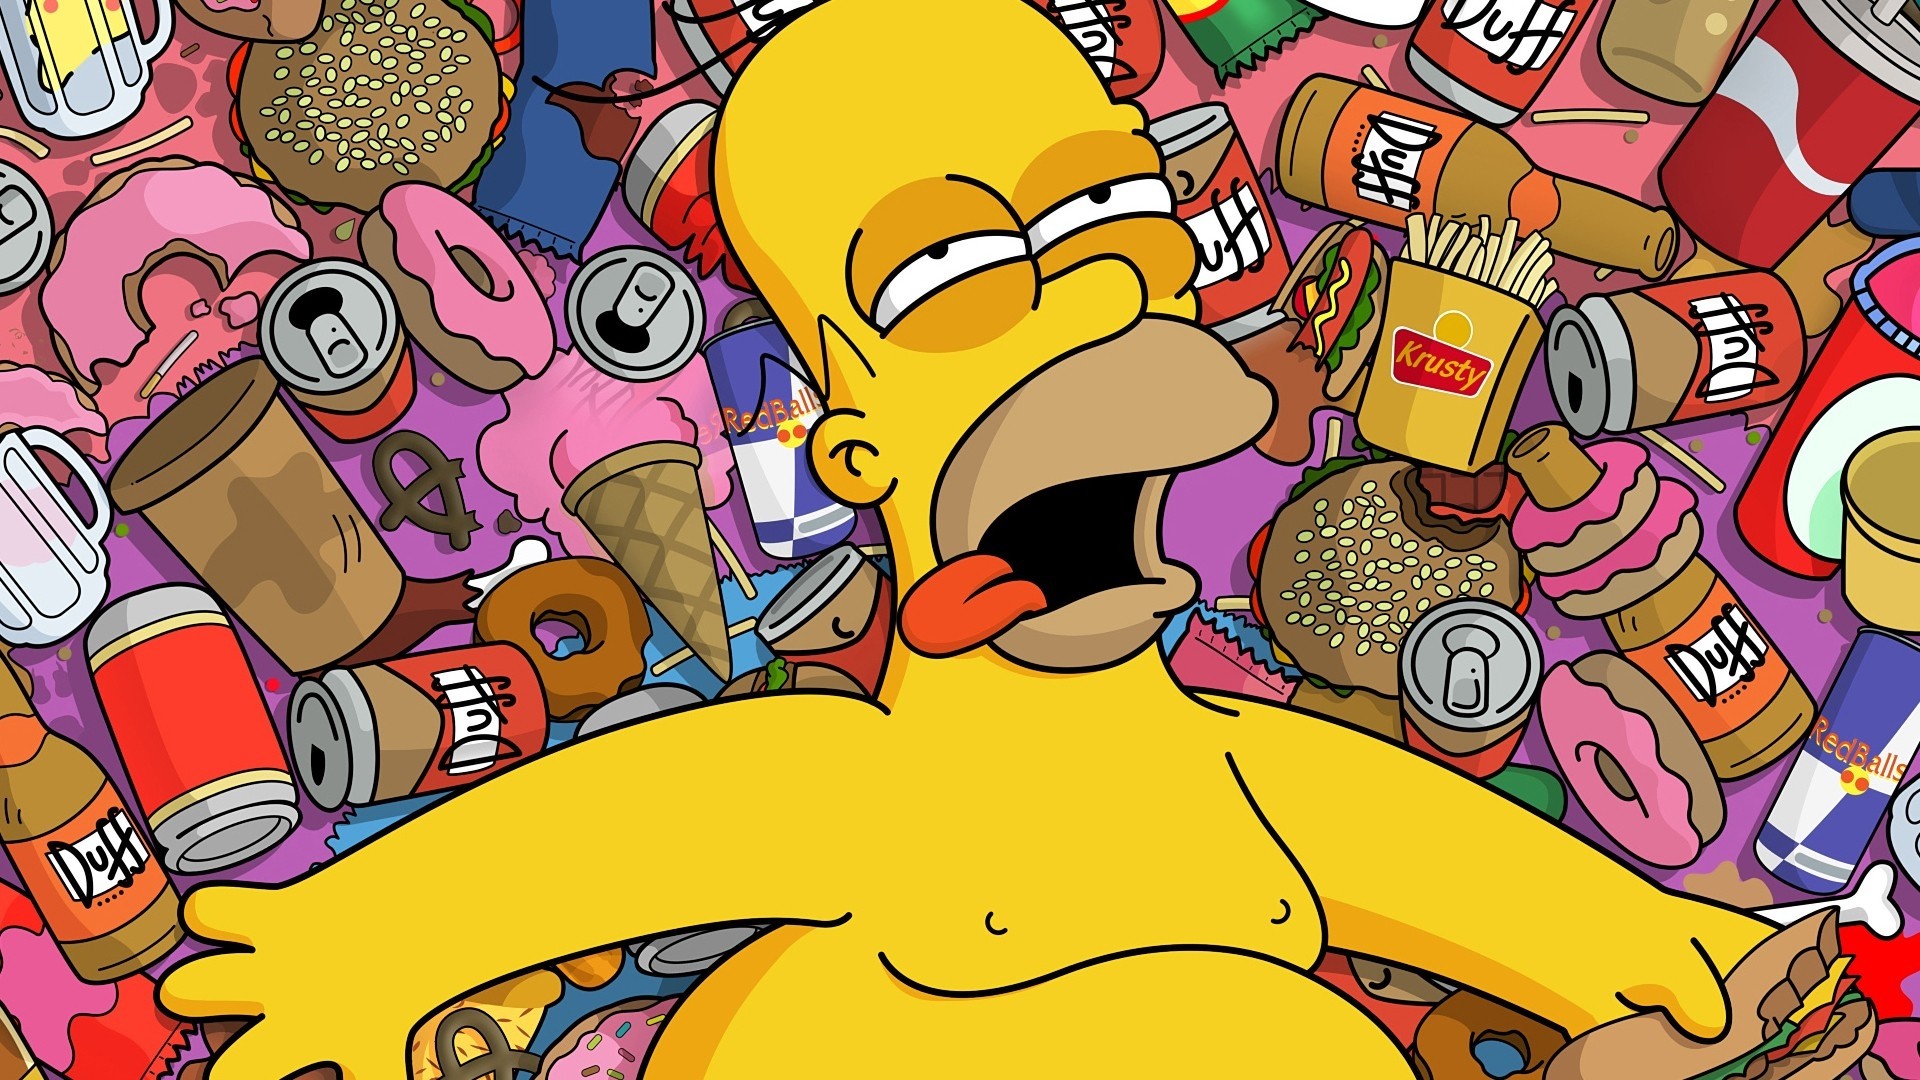 1920x1080 Beers cartoons food ice cream homer simpson donuts the simpsons krusty the  clown cigarettes red bull